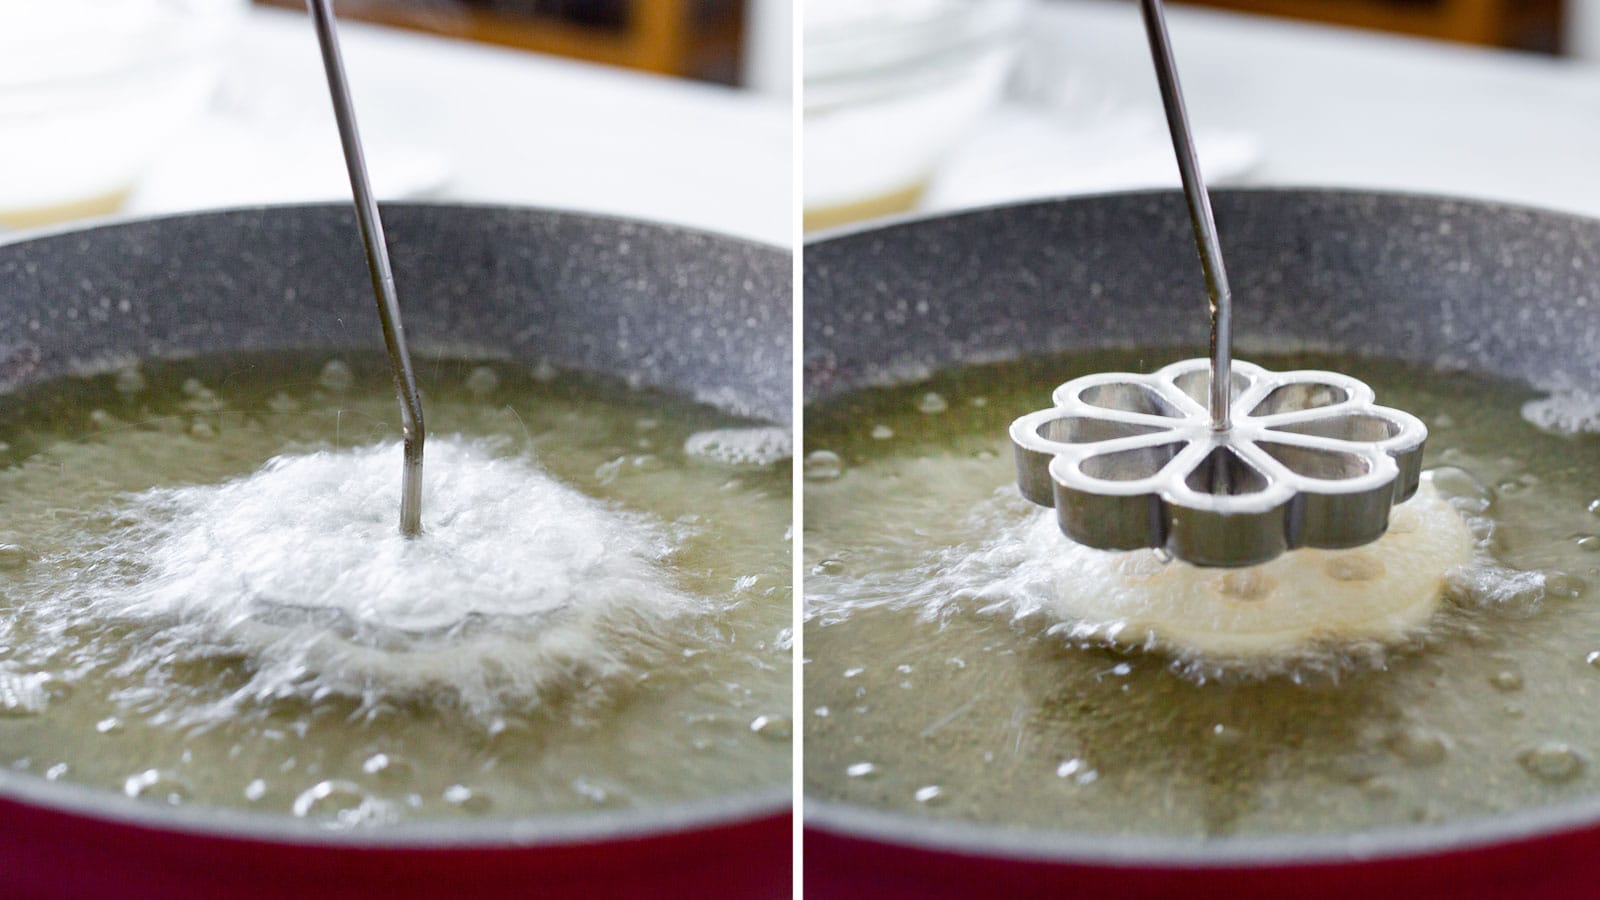 A collage with two photos of immersing the mold with batter into the oil and lifting it to detach the buñuelo.